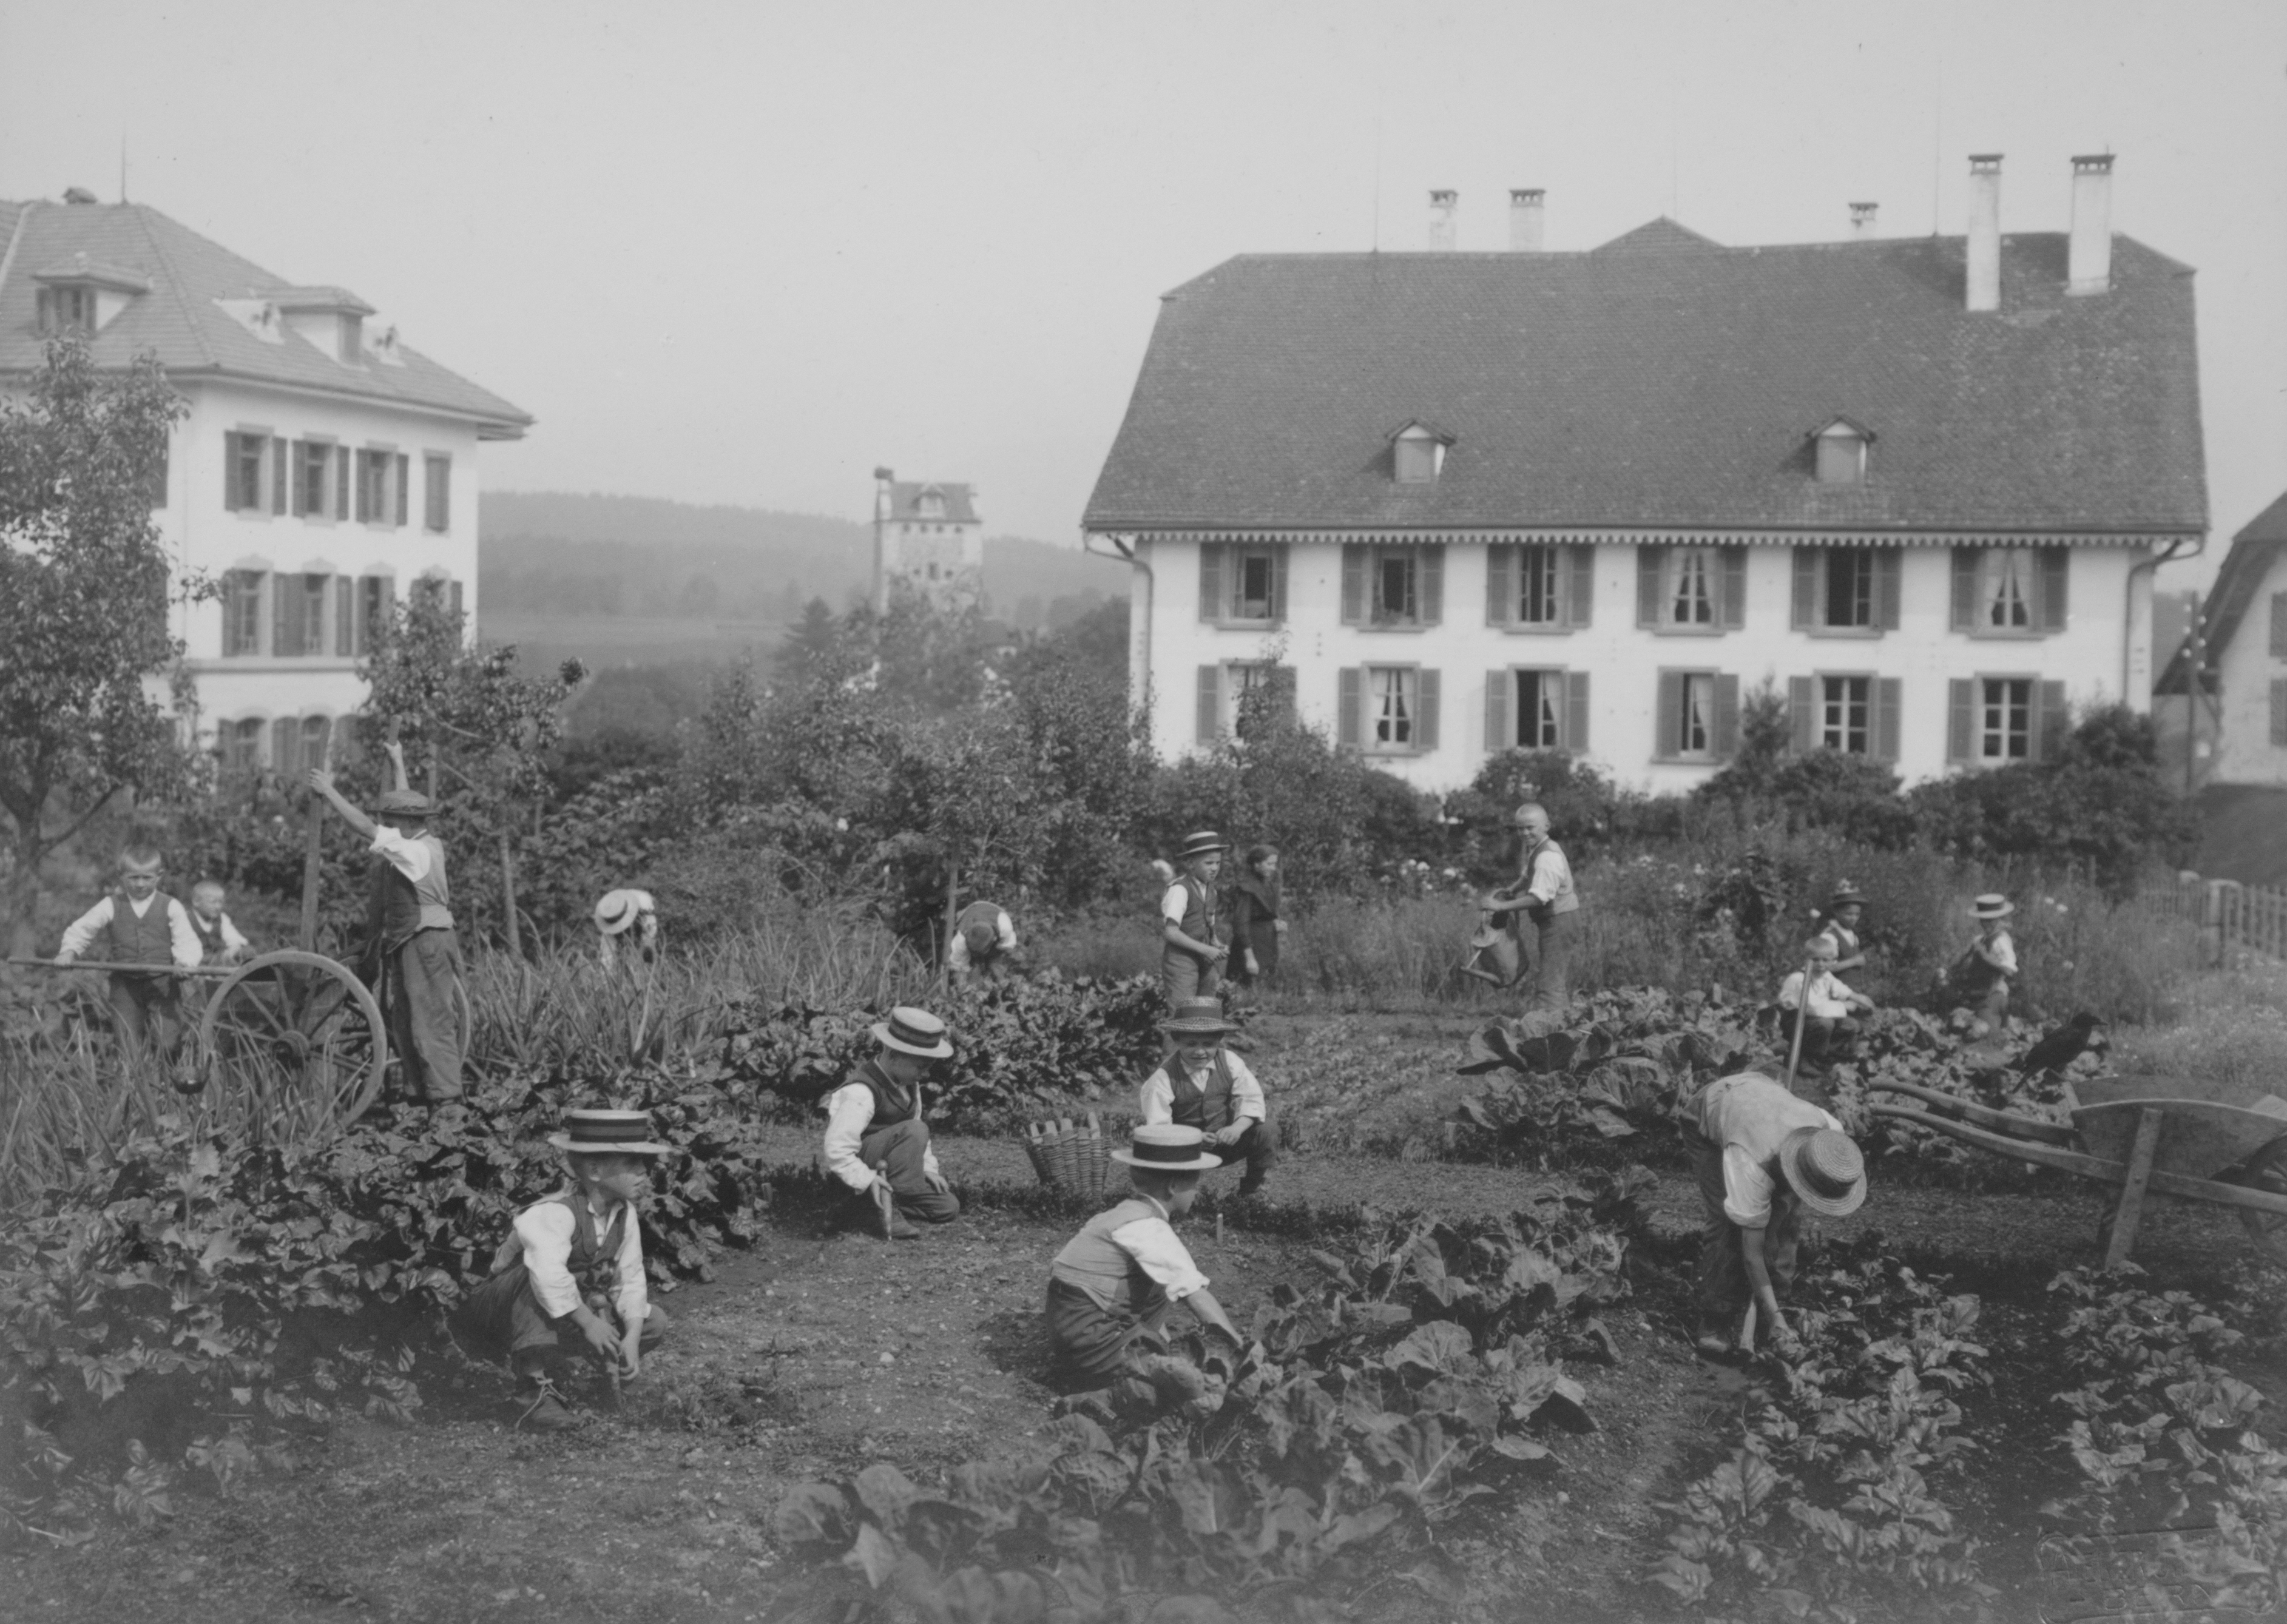 Exterior view of a children's home in Bern from 1914. Children work in the garden in front of the home.